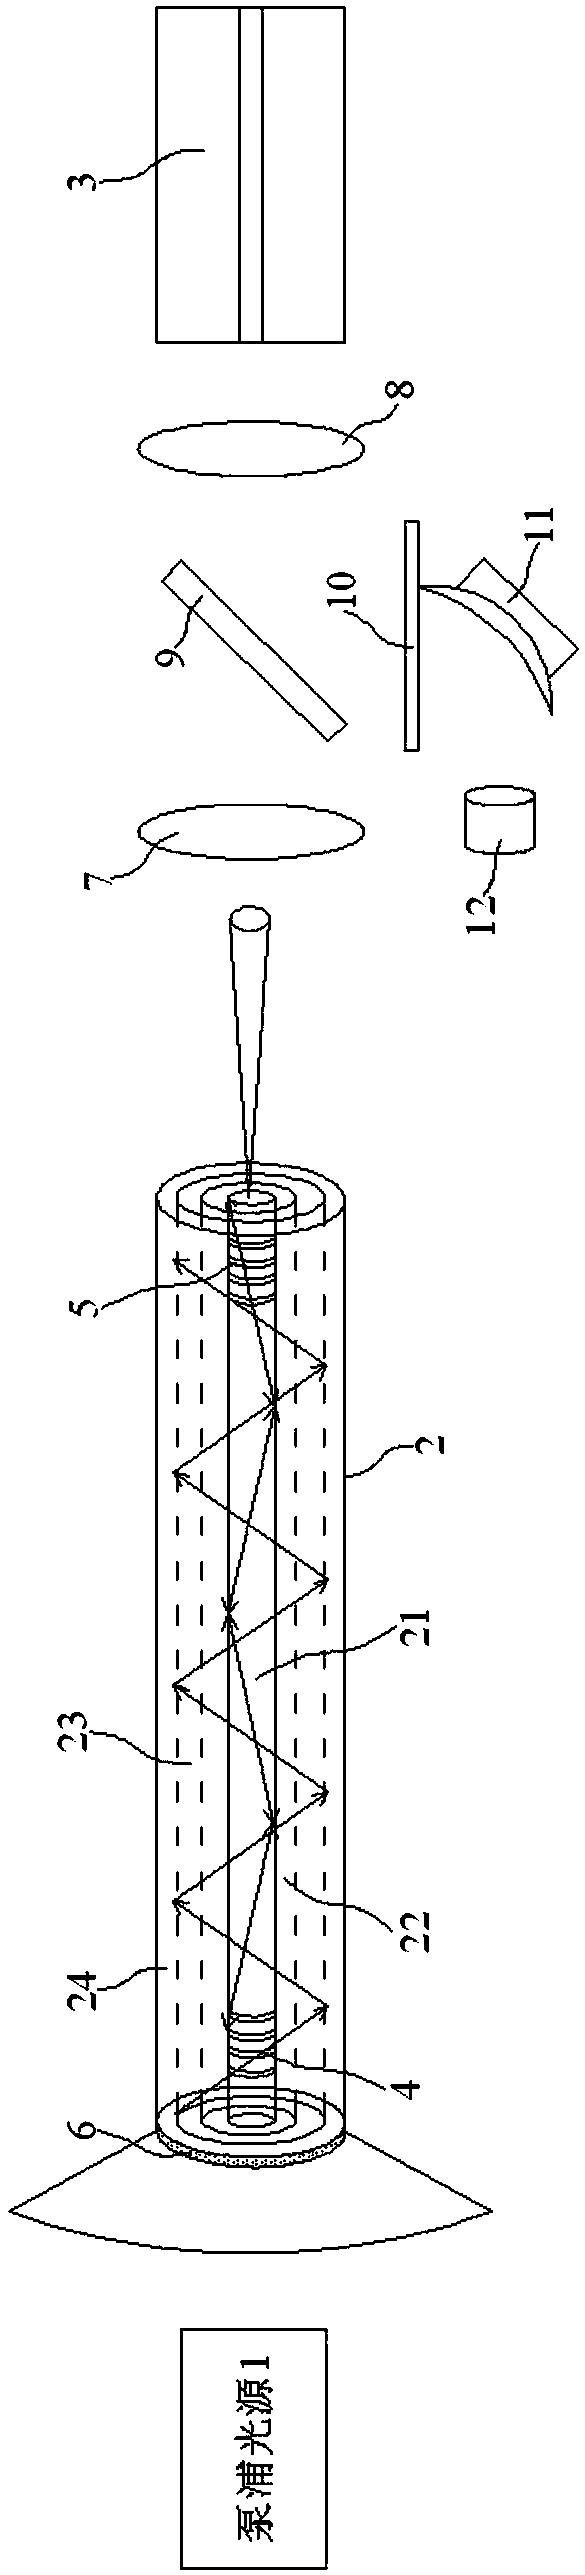 Lasers with Adaptive Adjustment of Laser Power